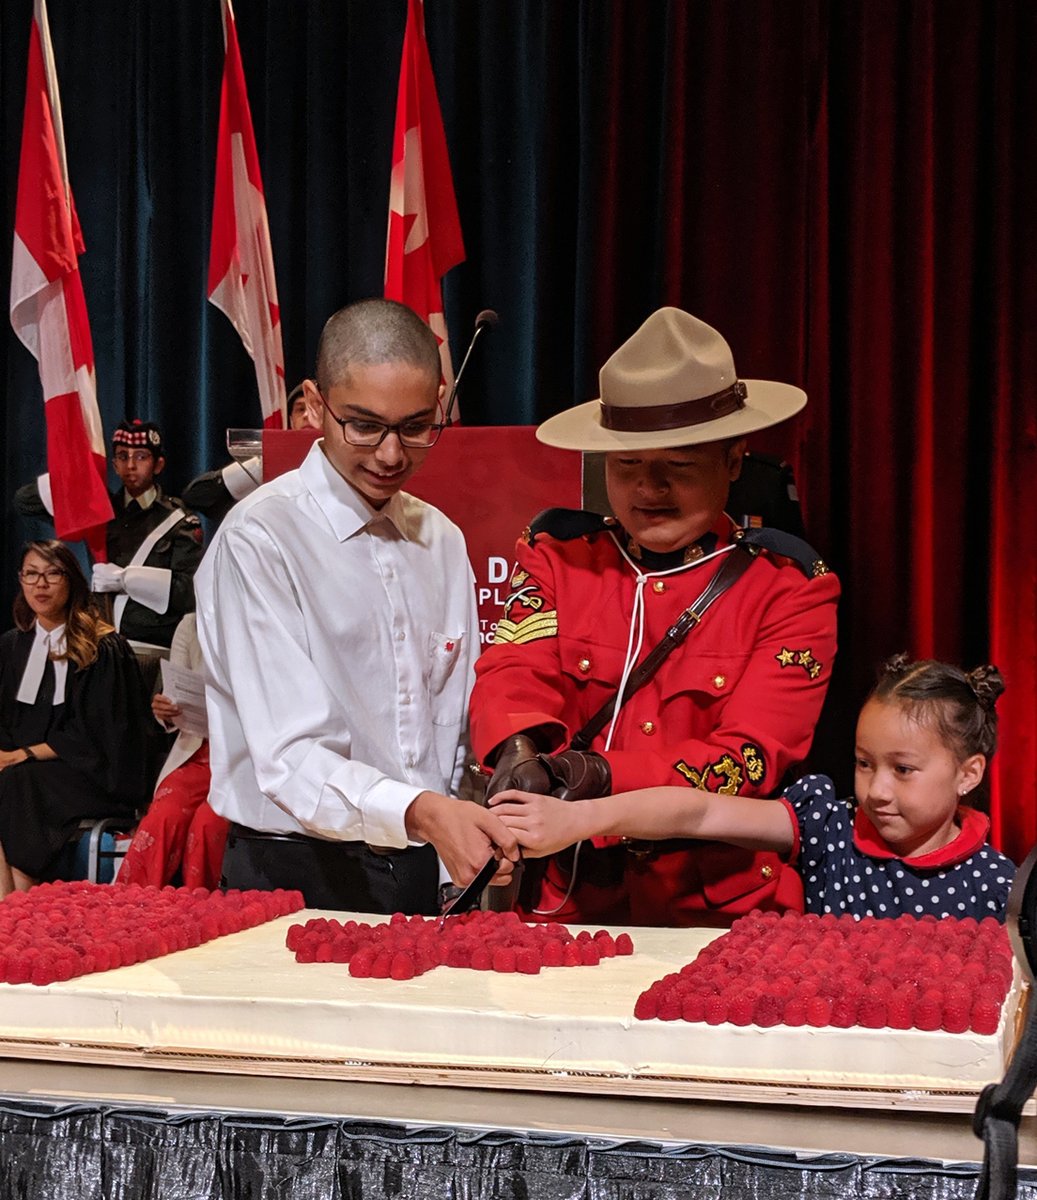 Citizenship ceremony at Canada Place, Vancouver, BC, Canada